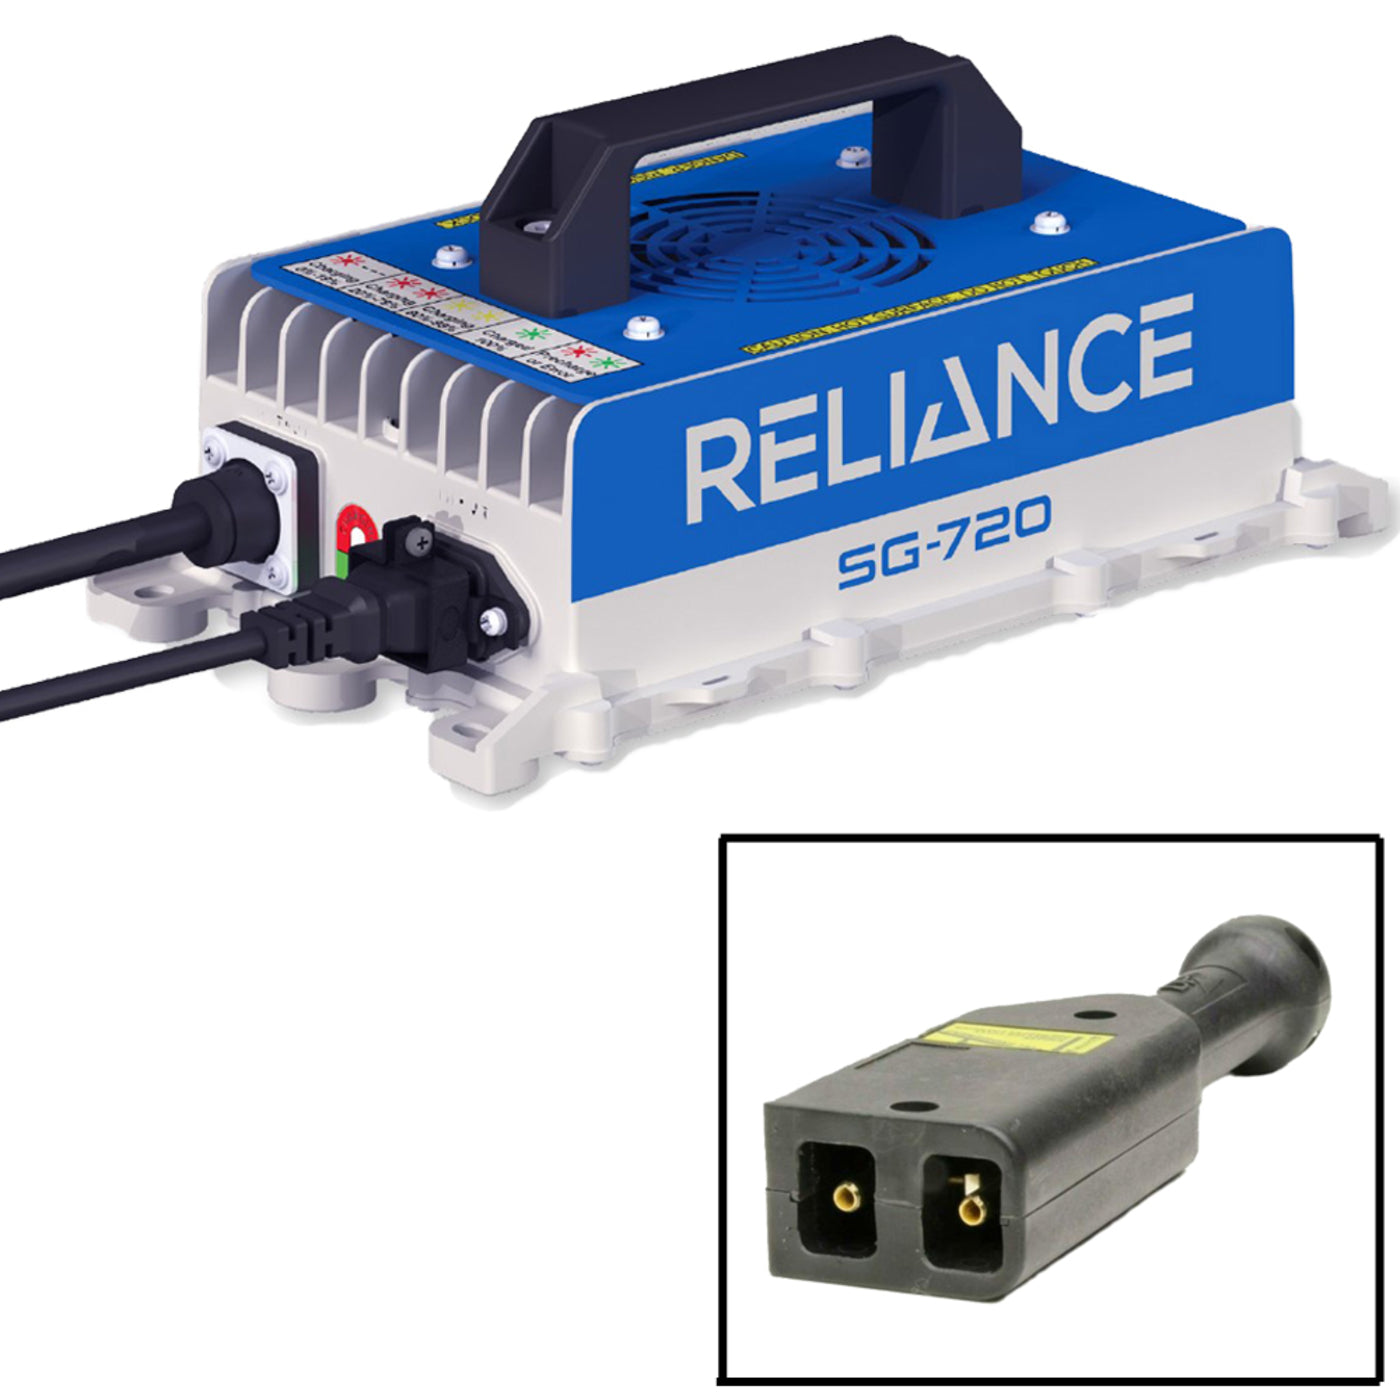 RELIANCE‚Ñ¢ SG-720 High Frequency Industrial E-Z-GO Charger - 36v PowerWise¬Æ Paddle